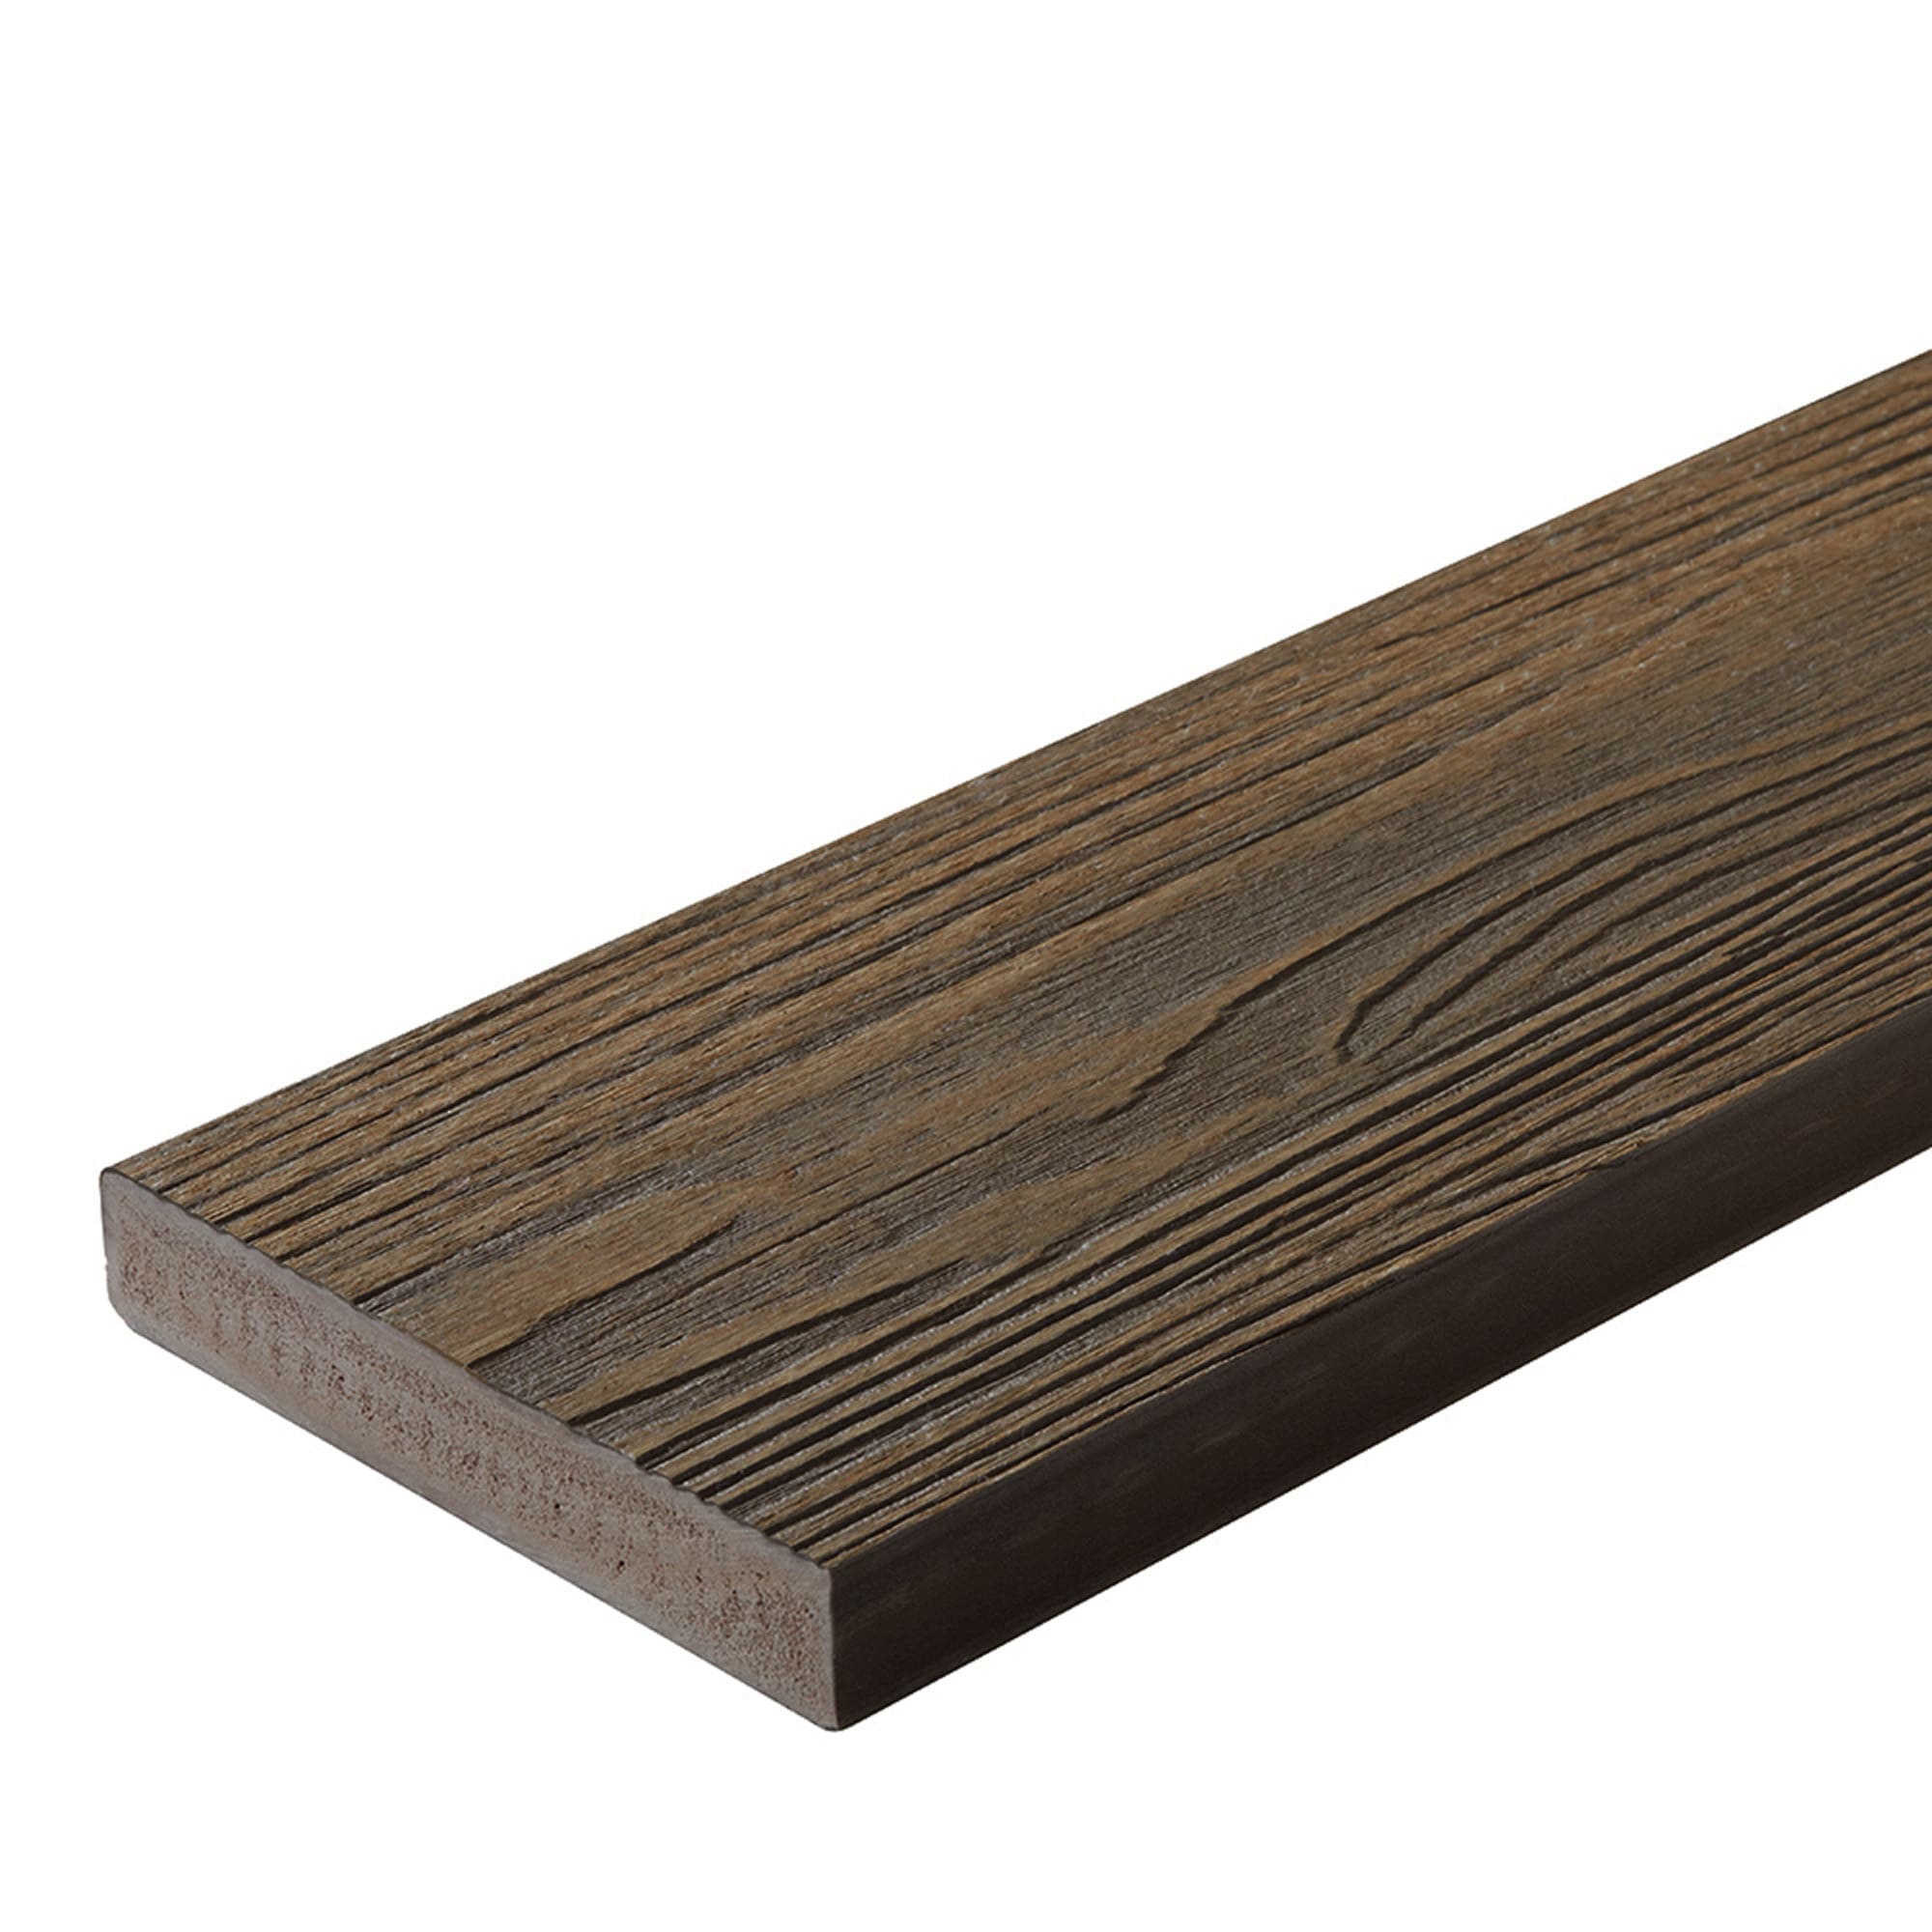 Any SQM Square Metres of Wooden Composite Decking Inc Boards Edging Fixing Packs 